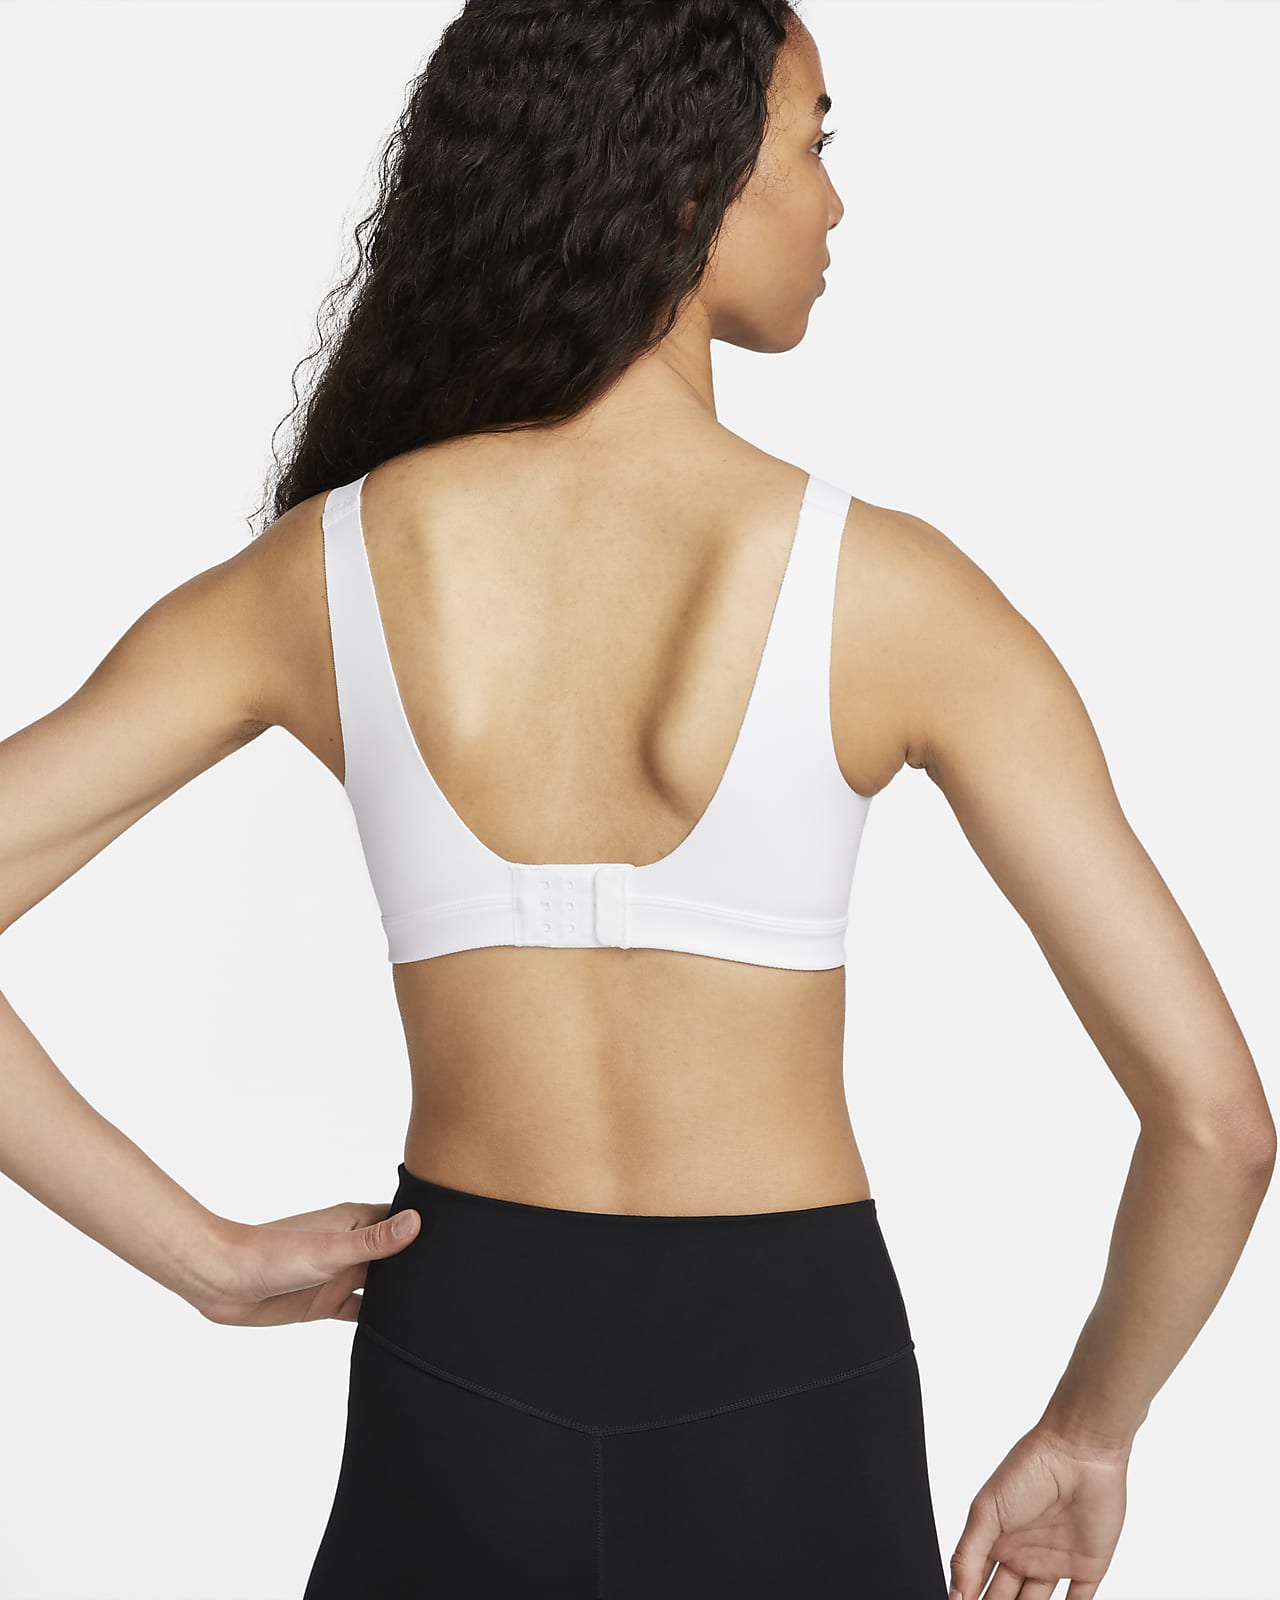 Nike Training Alpha Ultra-breathable Sports Bra Pink - $21 (64% Off Retail)  - From Ella